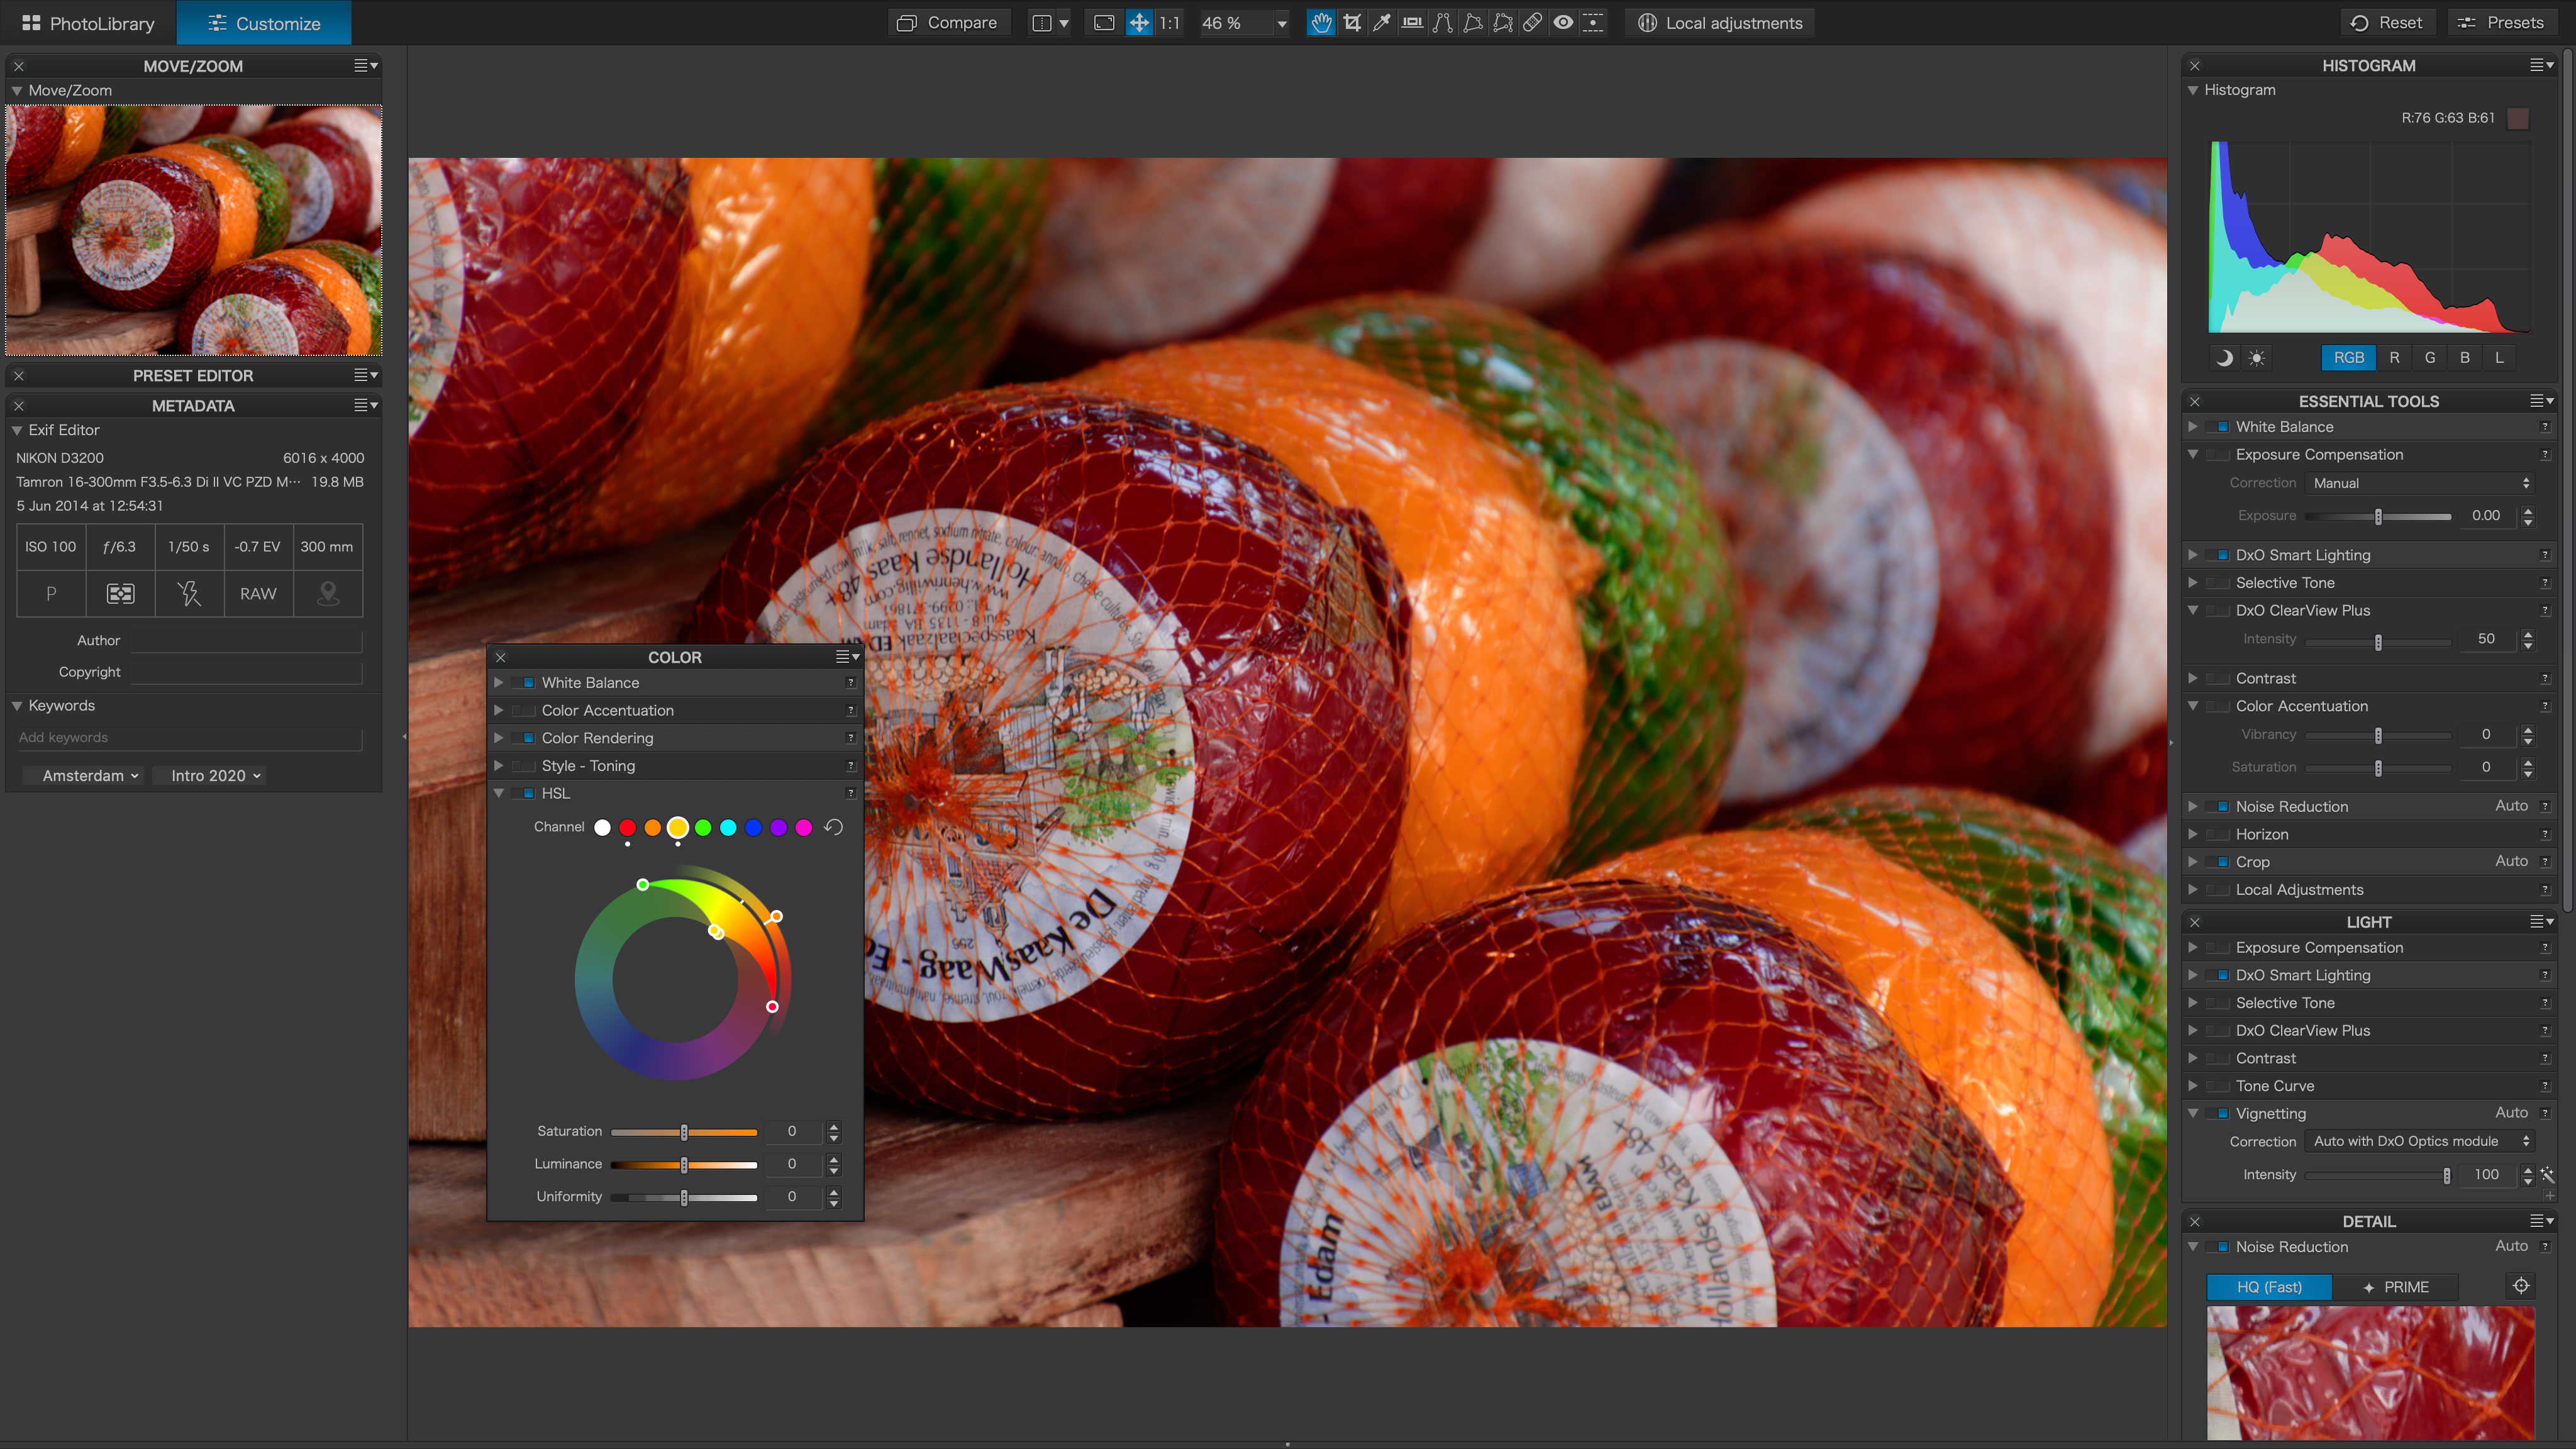 download the new version for mac DxO PhotoLab 7.0.2.83